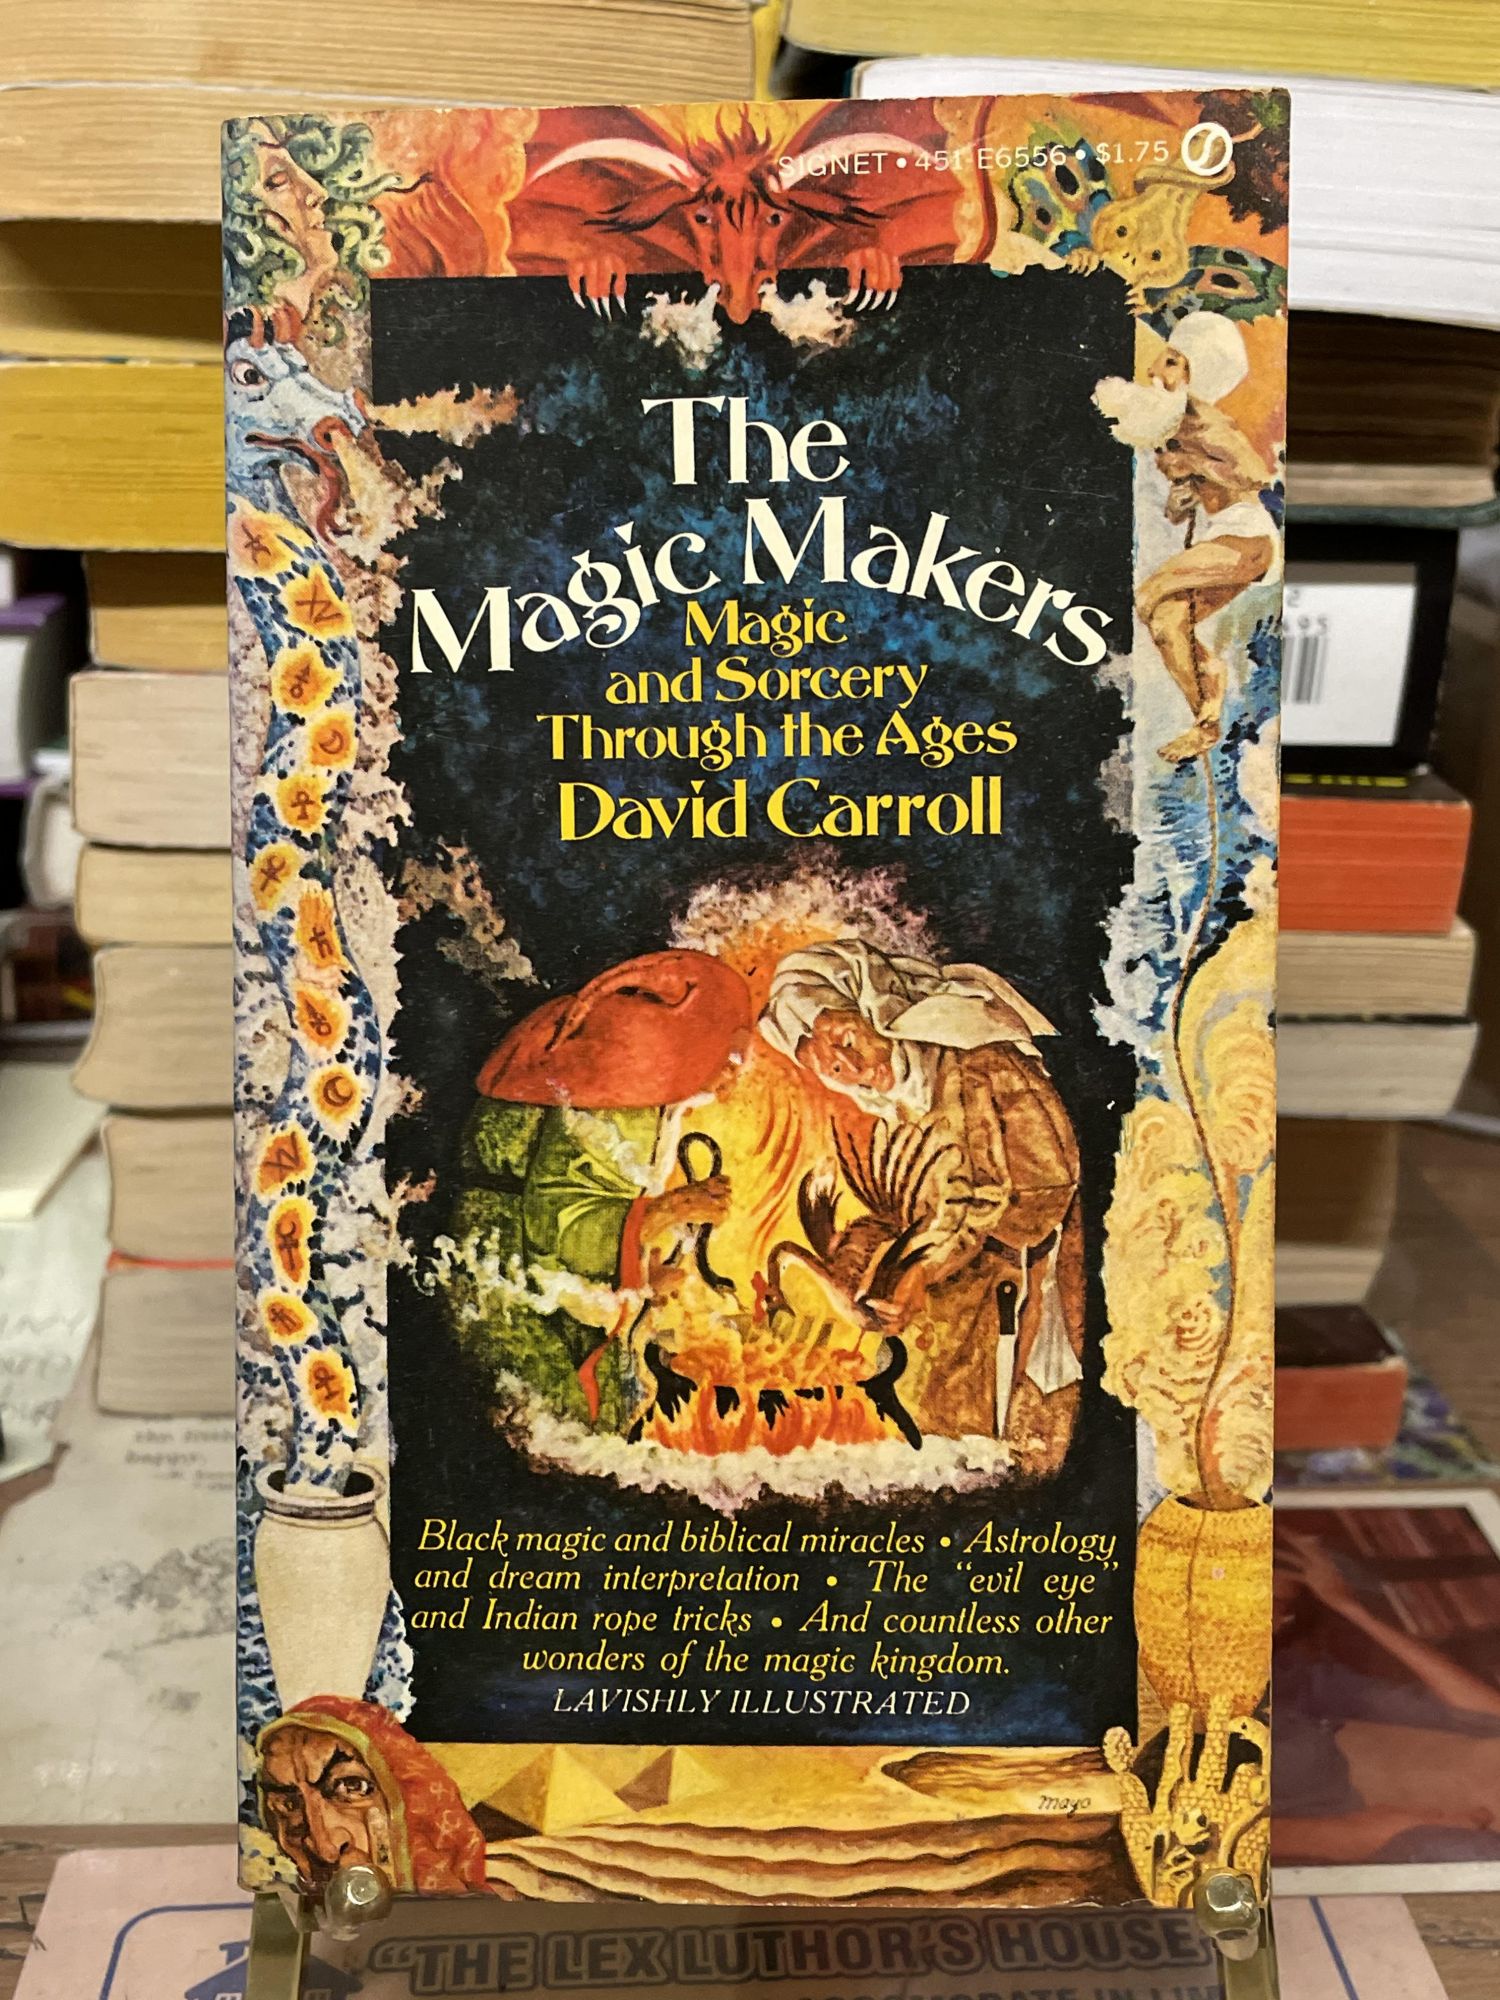 The Magic Maker: Magic and Sorcery Through the Ages, David Carroll